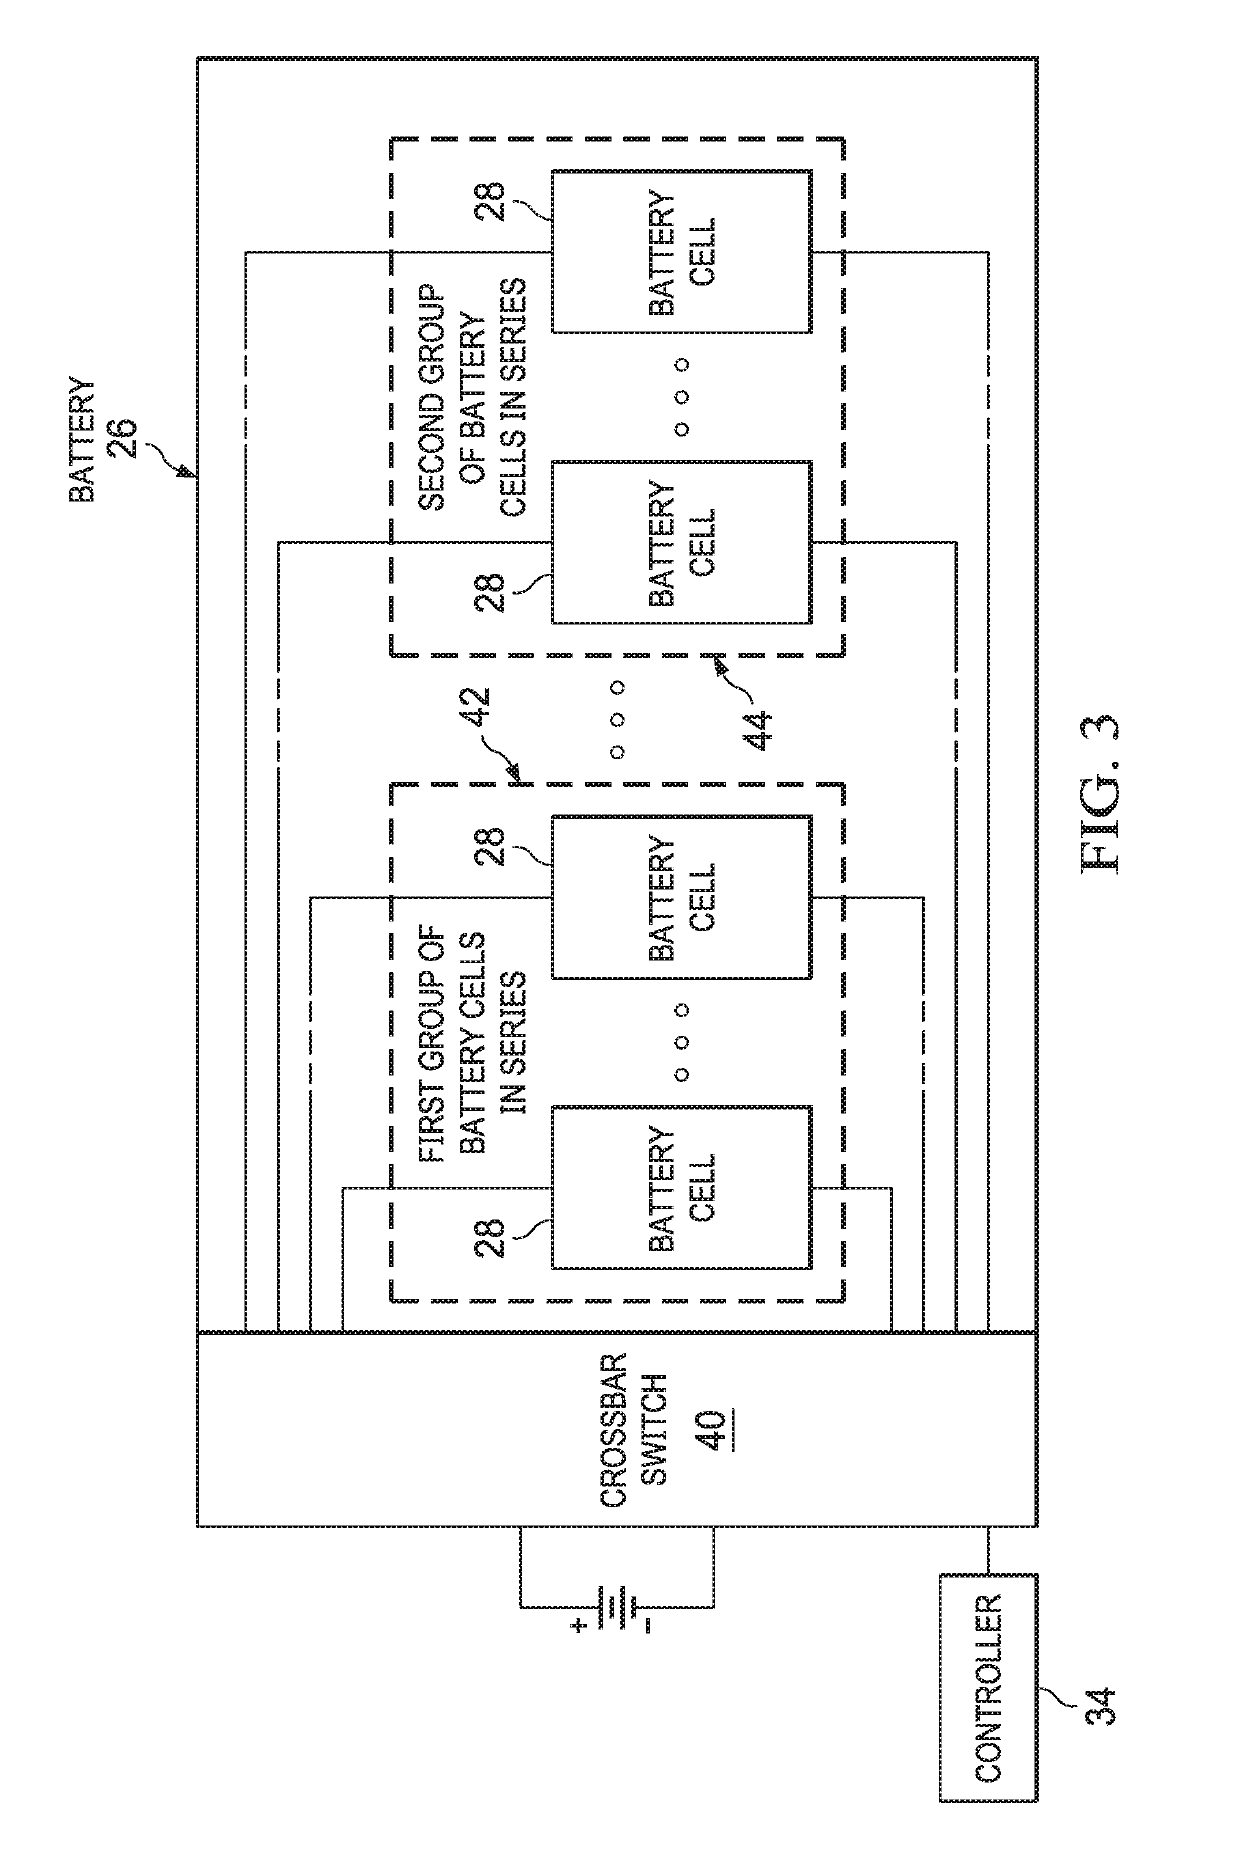 System and Method to Improve Battery Performance with Cycled Current Transfer